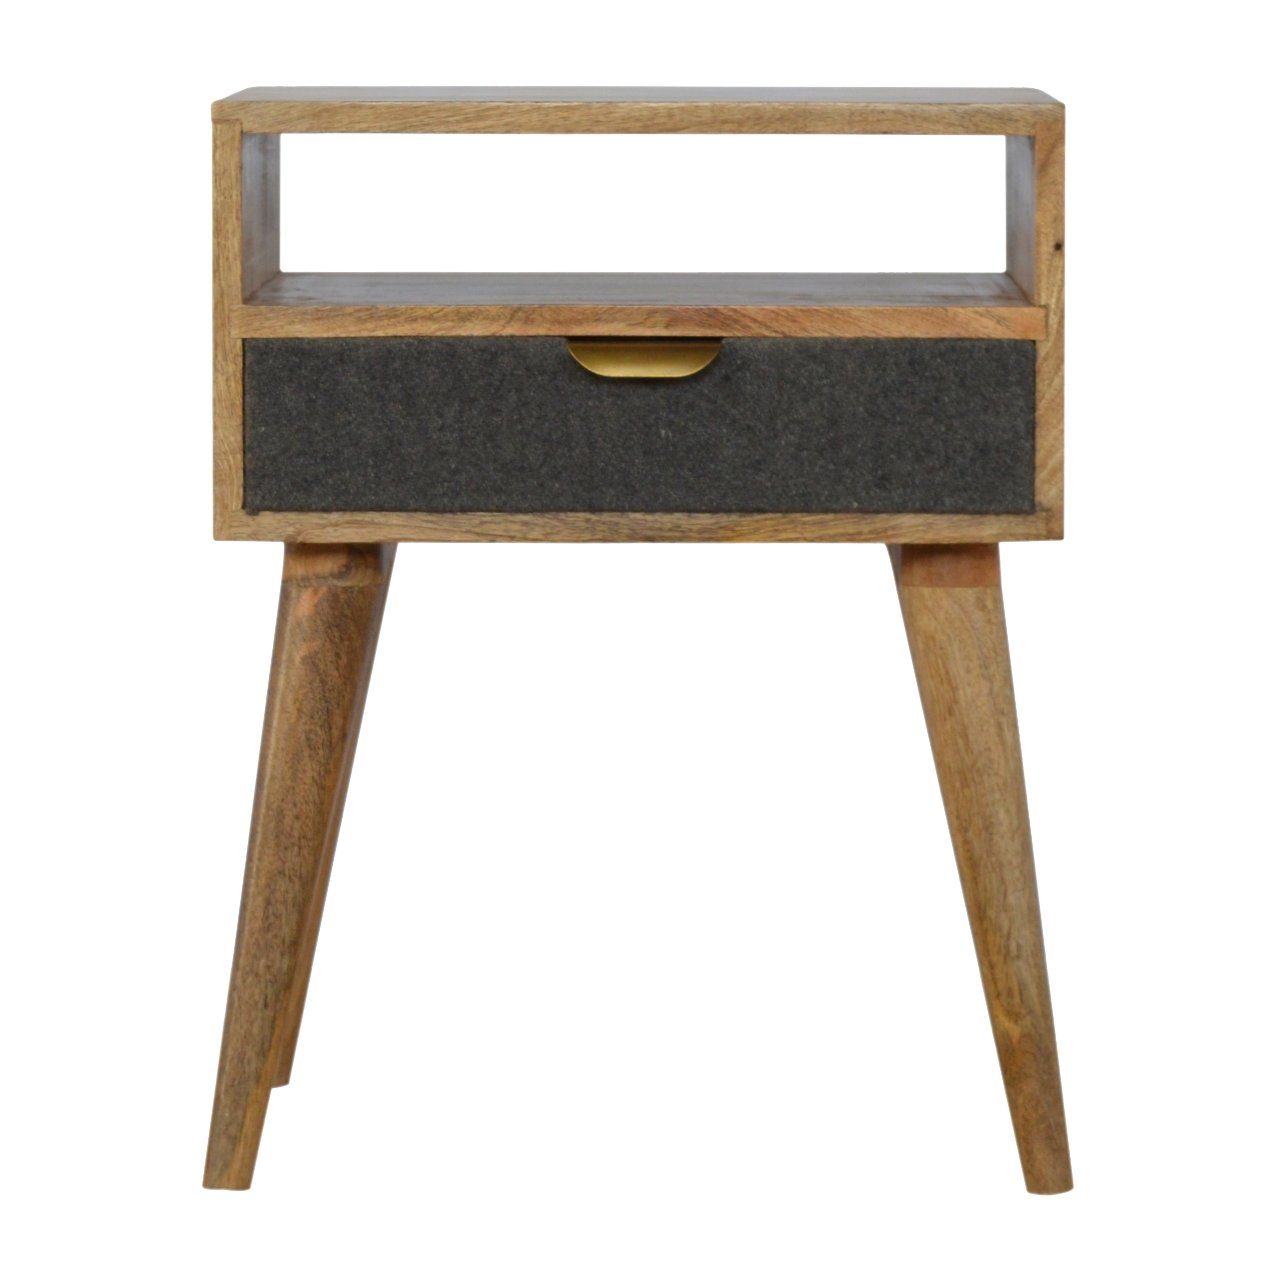 View Grey Tweed Bedside with Open Slot information